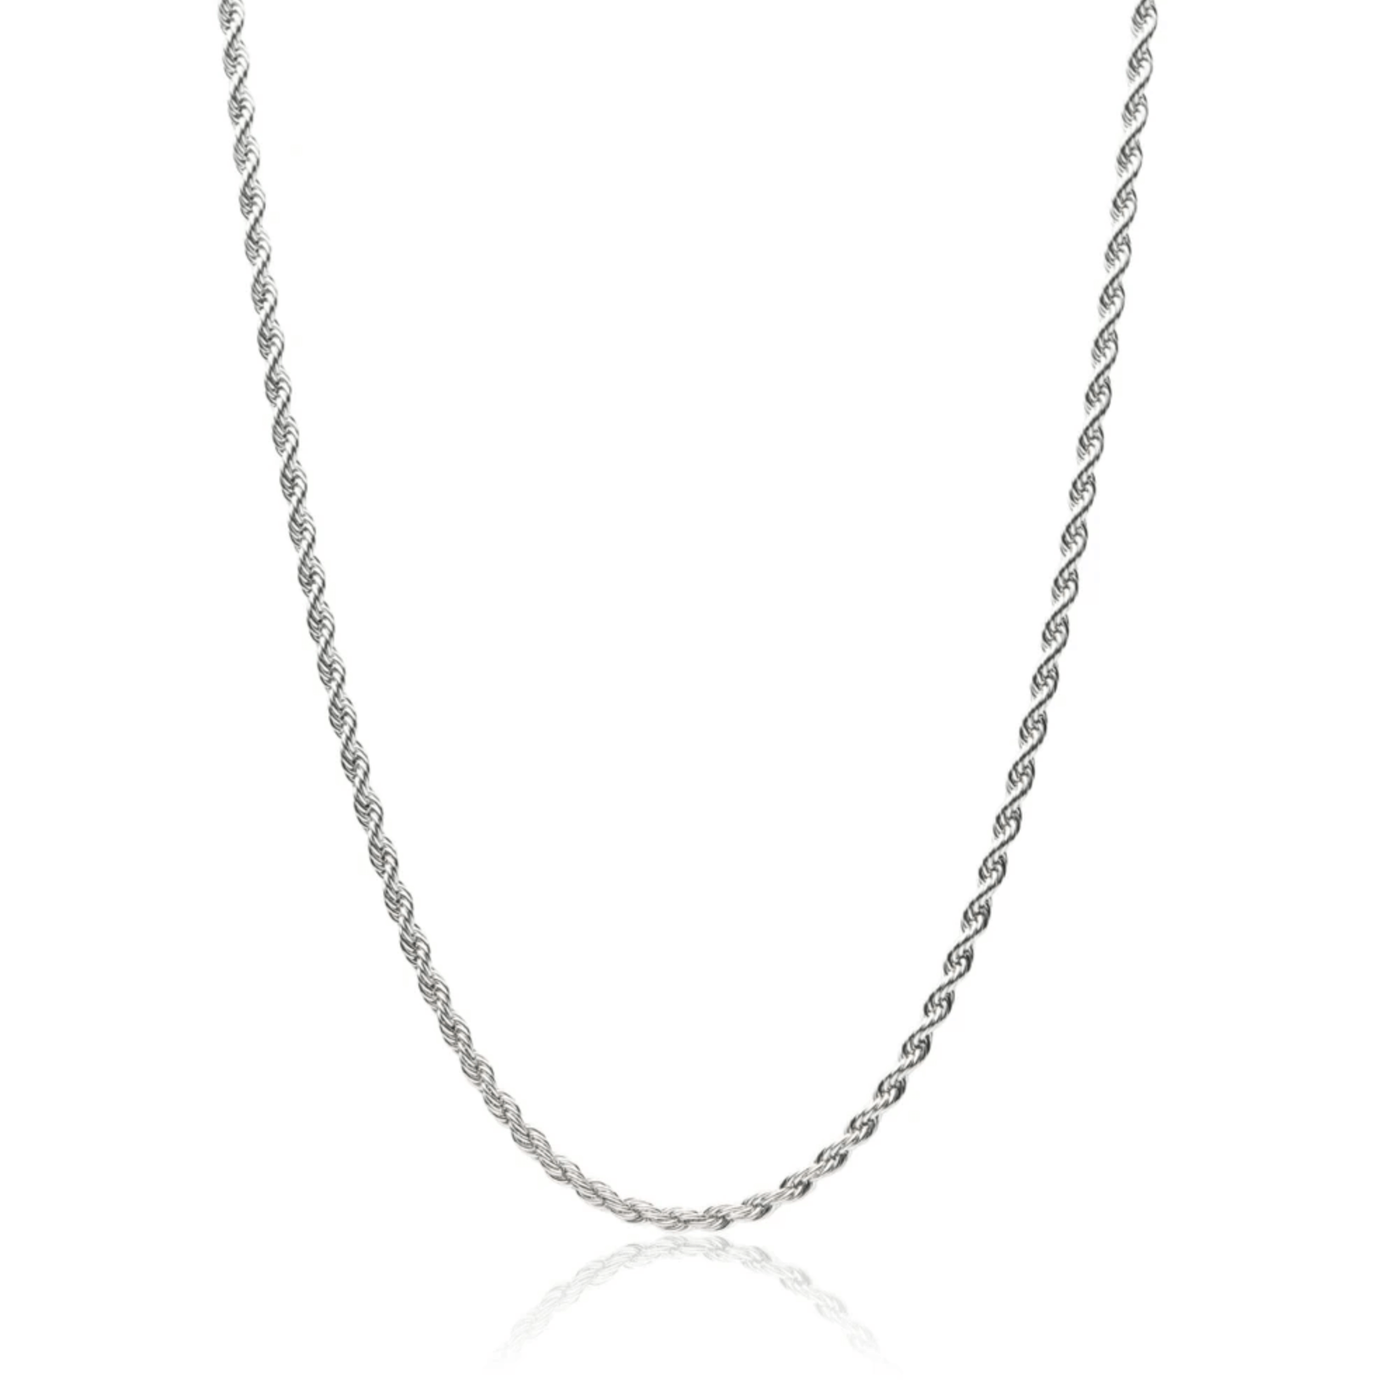 Silver Rope Chain (4mm)